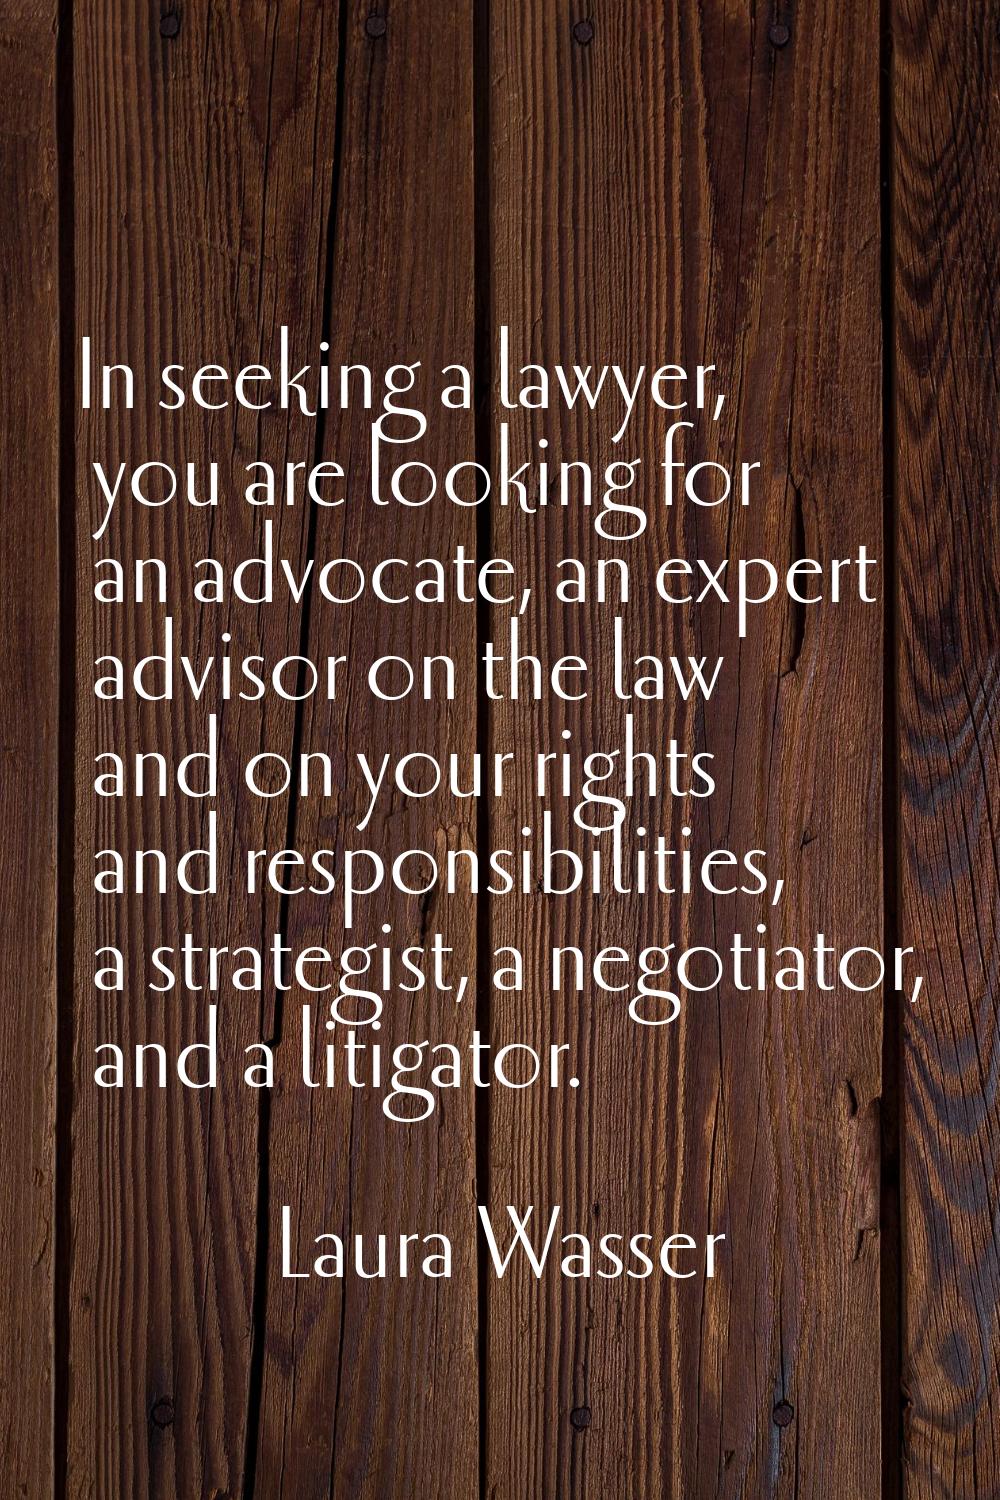 In seeking a lawyer, you are looking for an advocate, an expert advisor on the law and on your righ